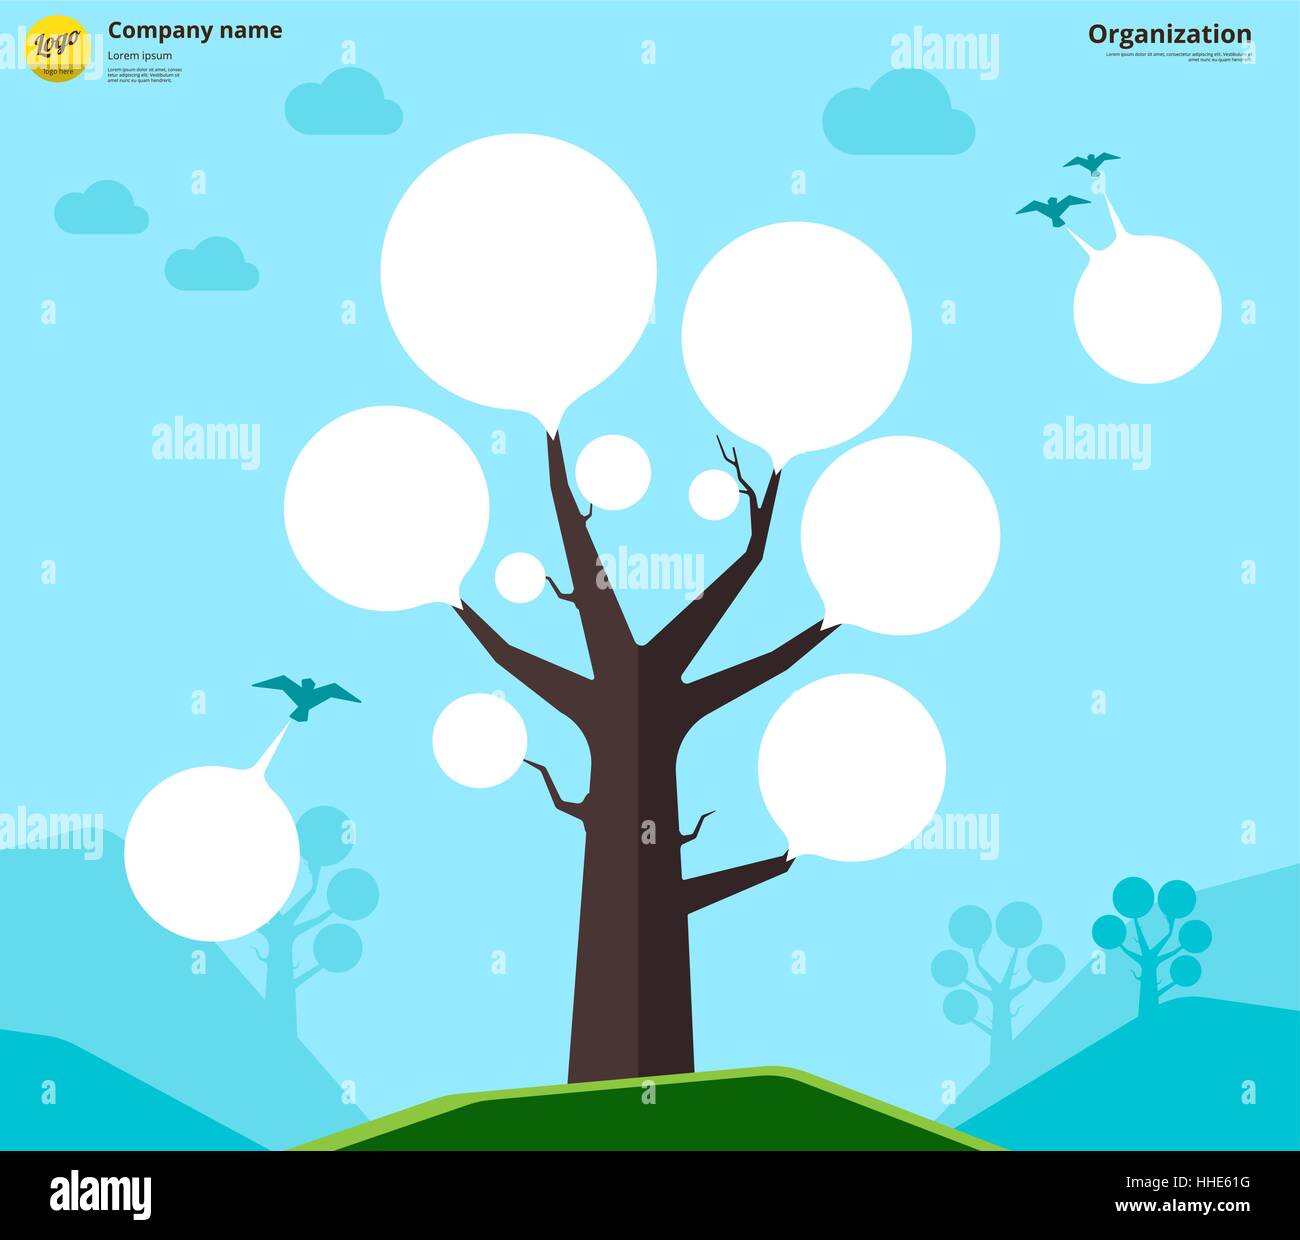 Organization chart tree concept. Group layer in file. Stock vector illustration. Stock Vector